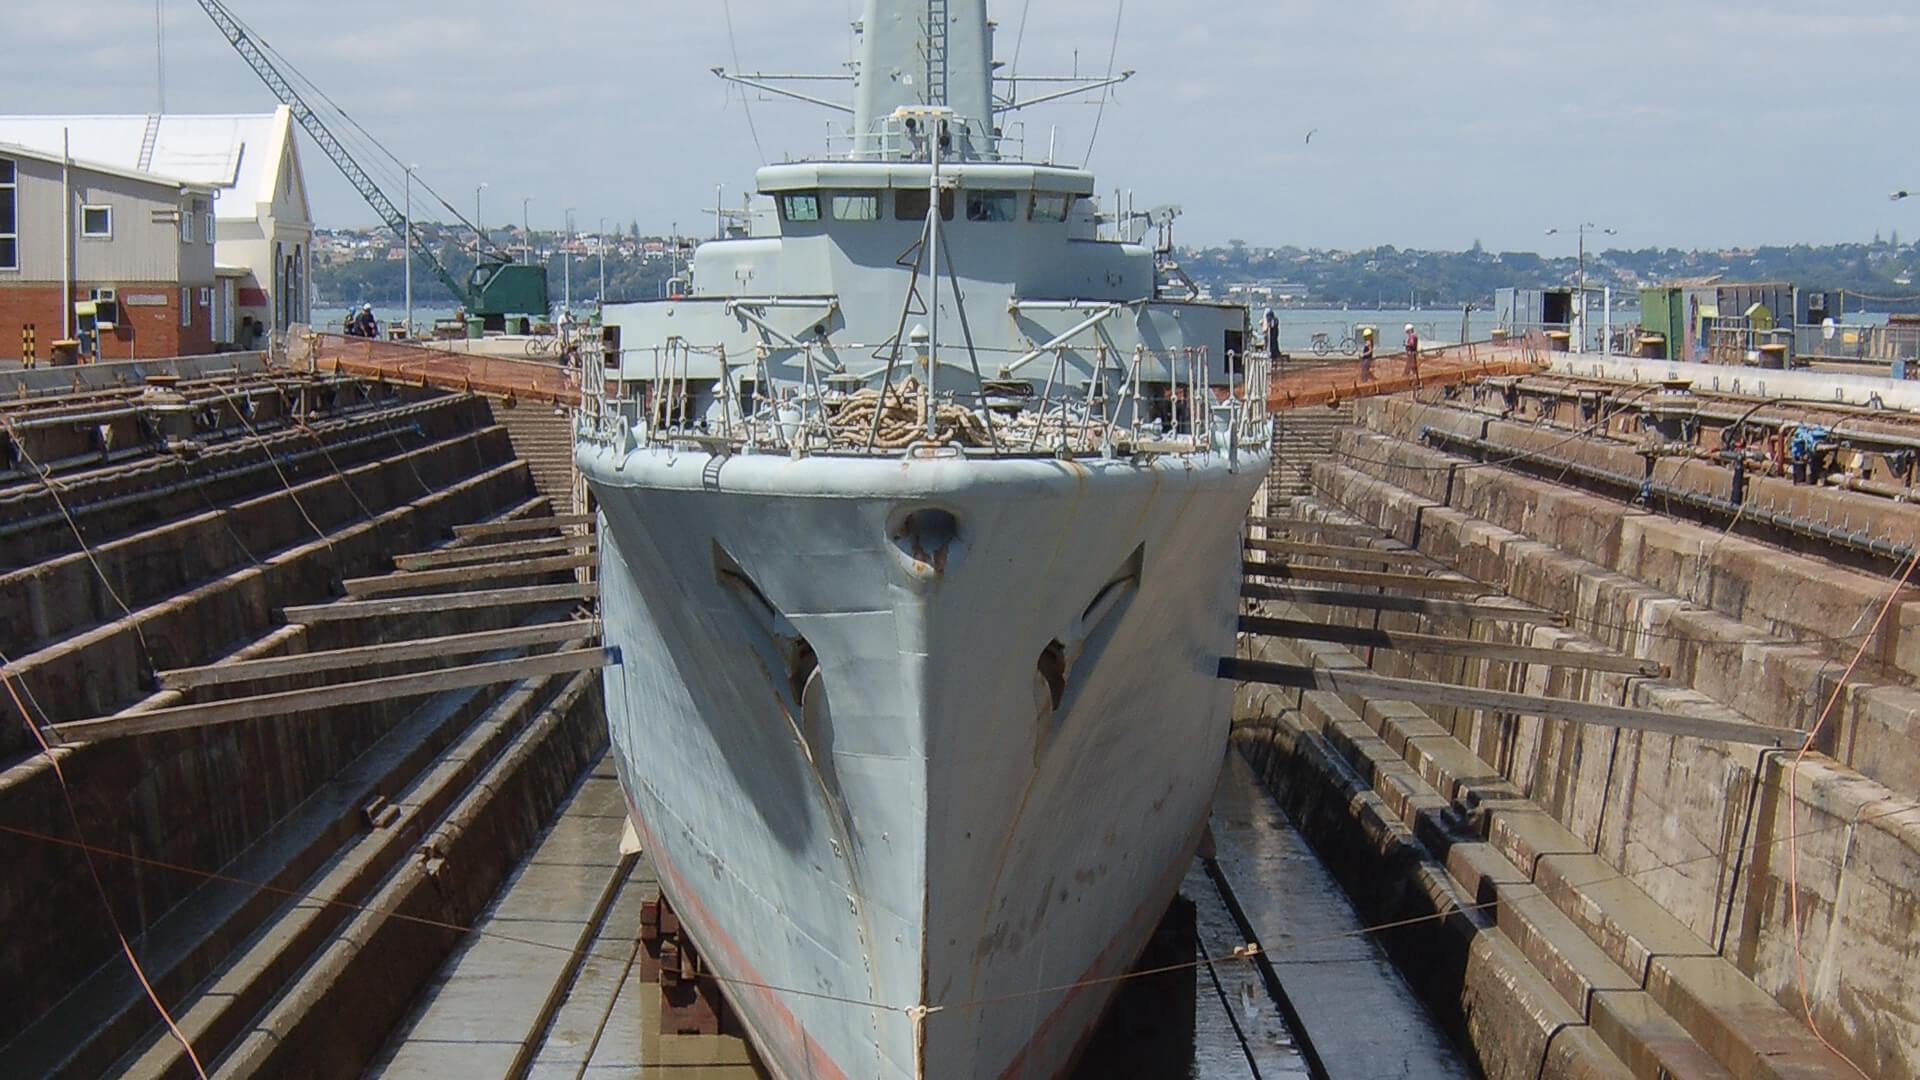 Drydock for hull clean